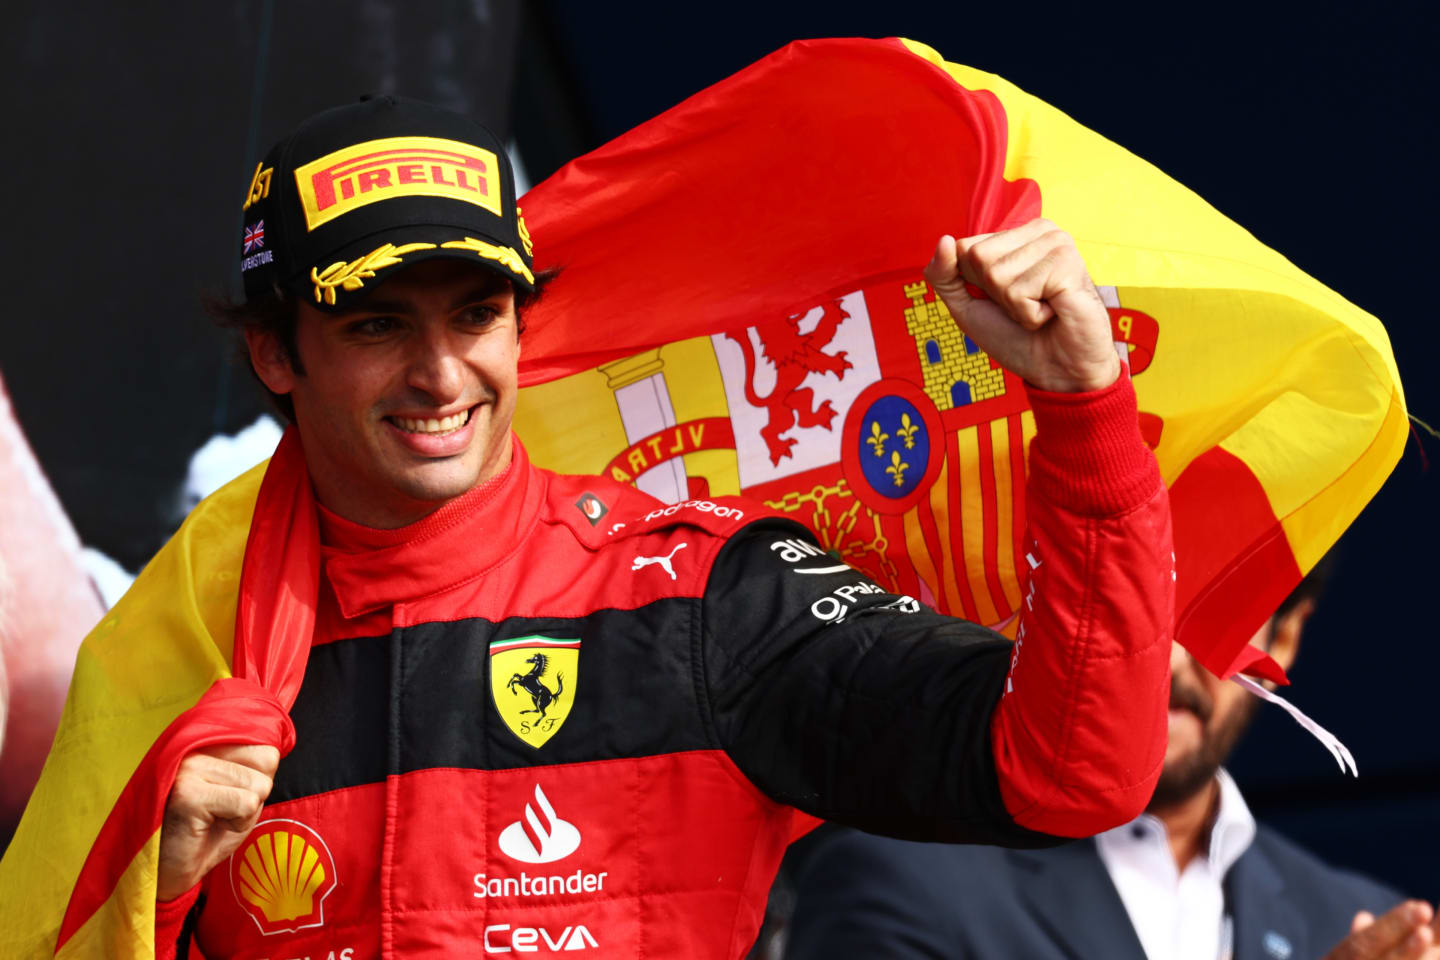 NORTHAMPTON, ENGLAND - JULY 03: Race winner Carlos Sainz of Spain and Ferrari celebrates on the podium during the F1 Grand Prix of Great Britain at Silverstone on July 03, 2022 in Northampton, England. (Photo by Clive Rose/Getty Images)